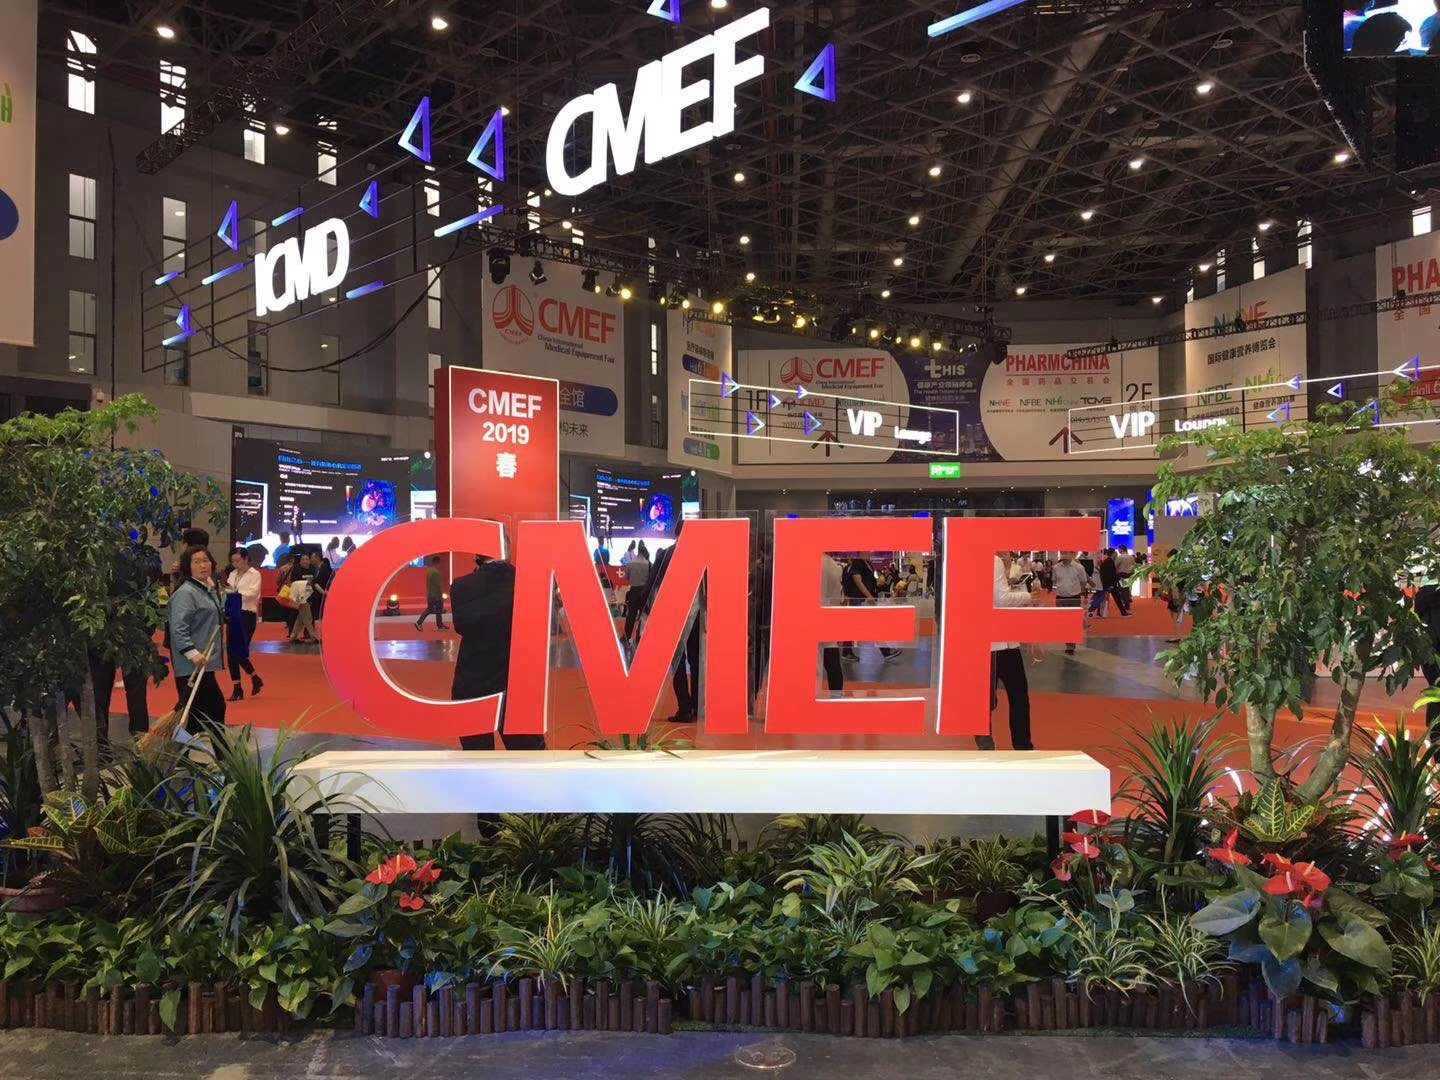 New appearance in CMEF Shanghai